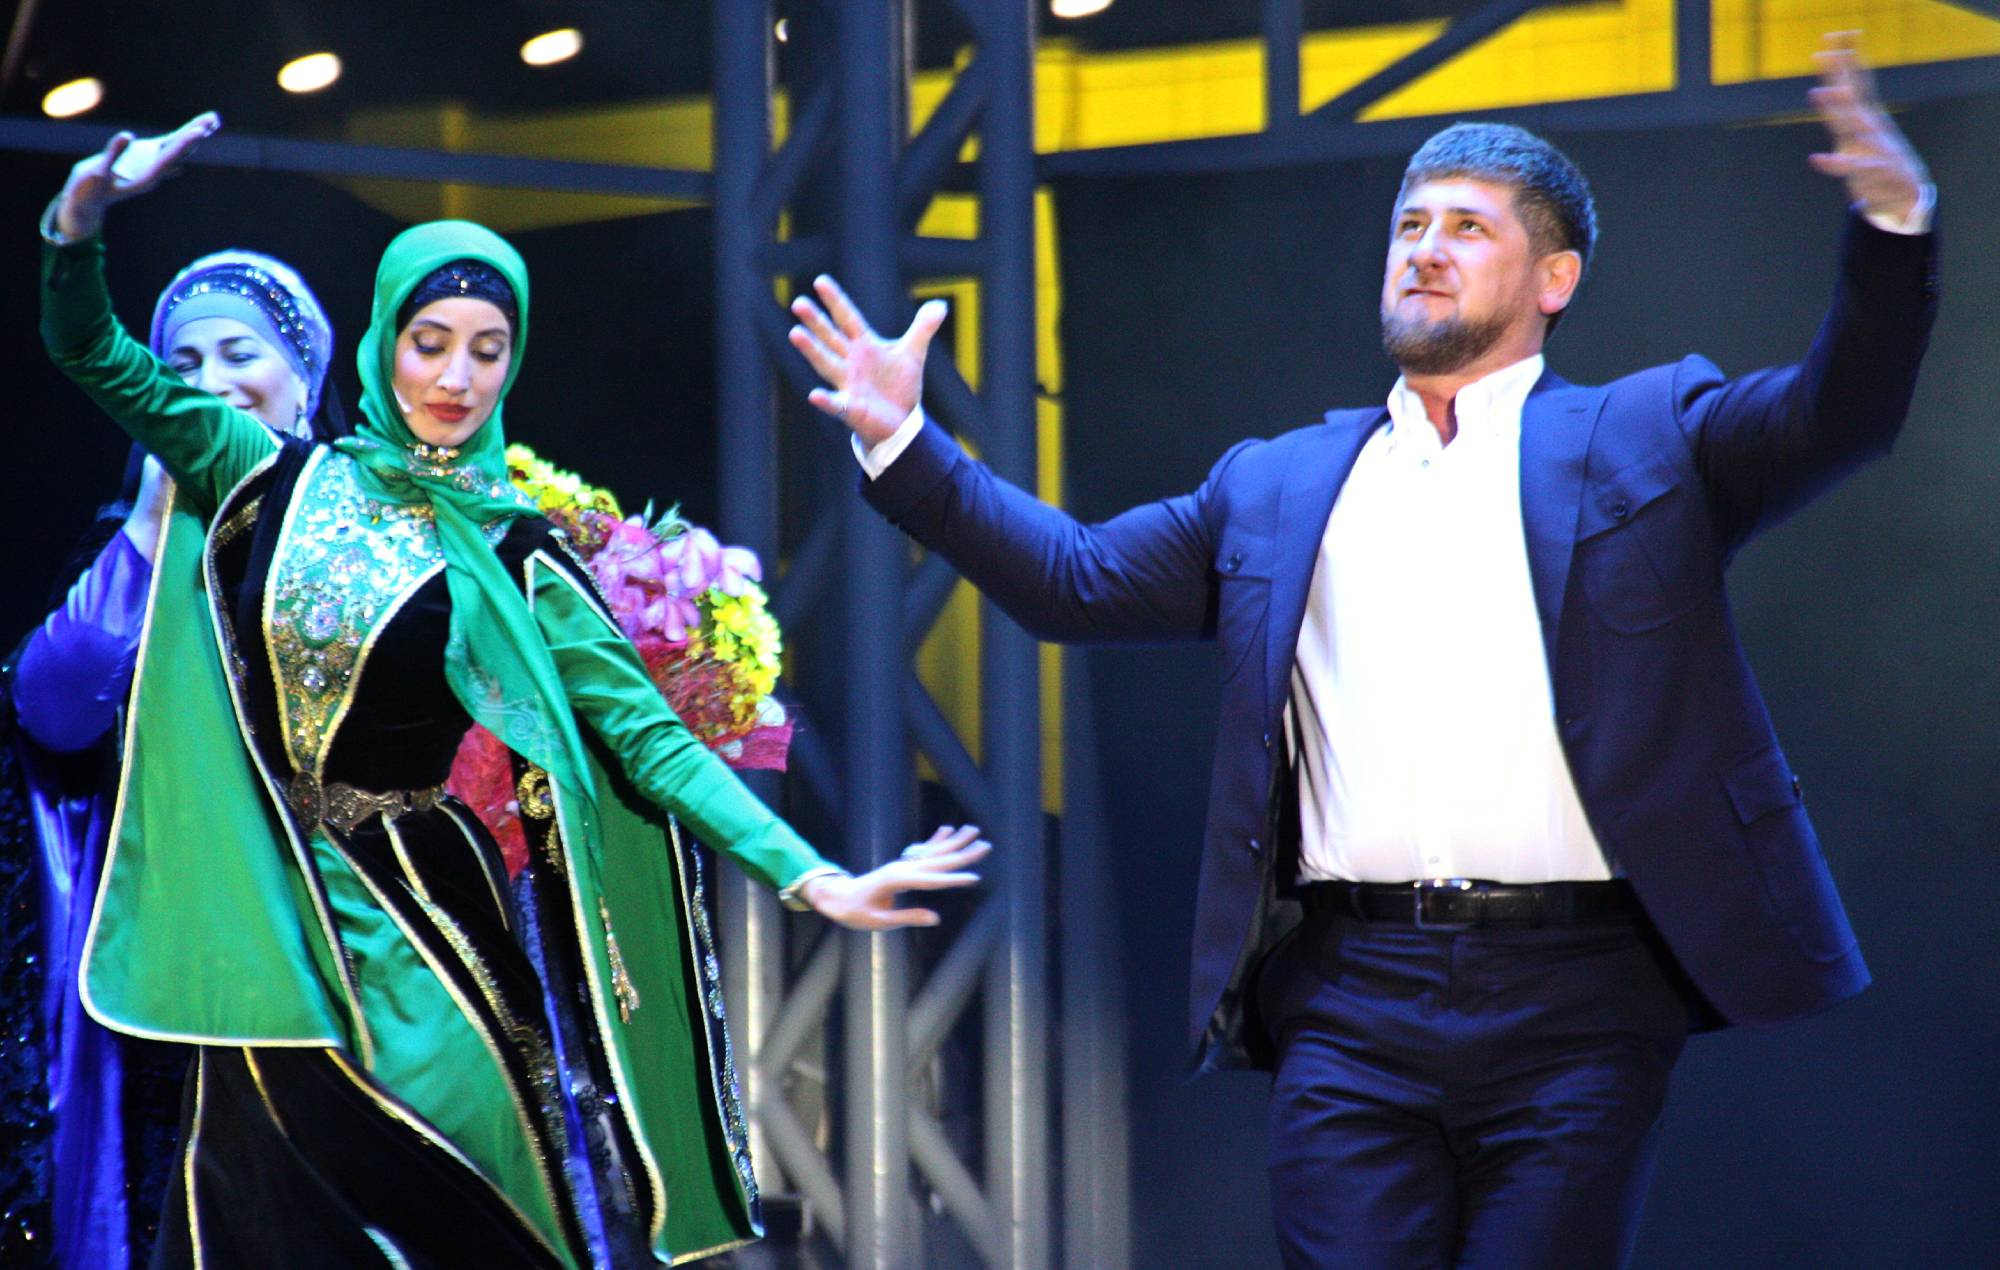 Chechen leader Ramzan Kadyrov (R) dances during a performance in Grozny late on October 5, 2011. (Photo credit should read STR/AFP via Getty Images)